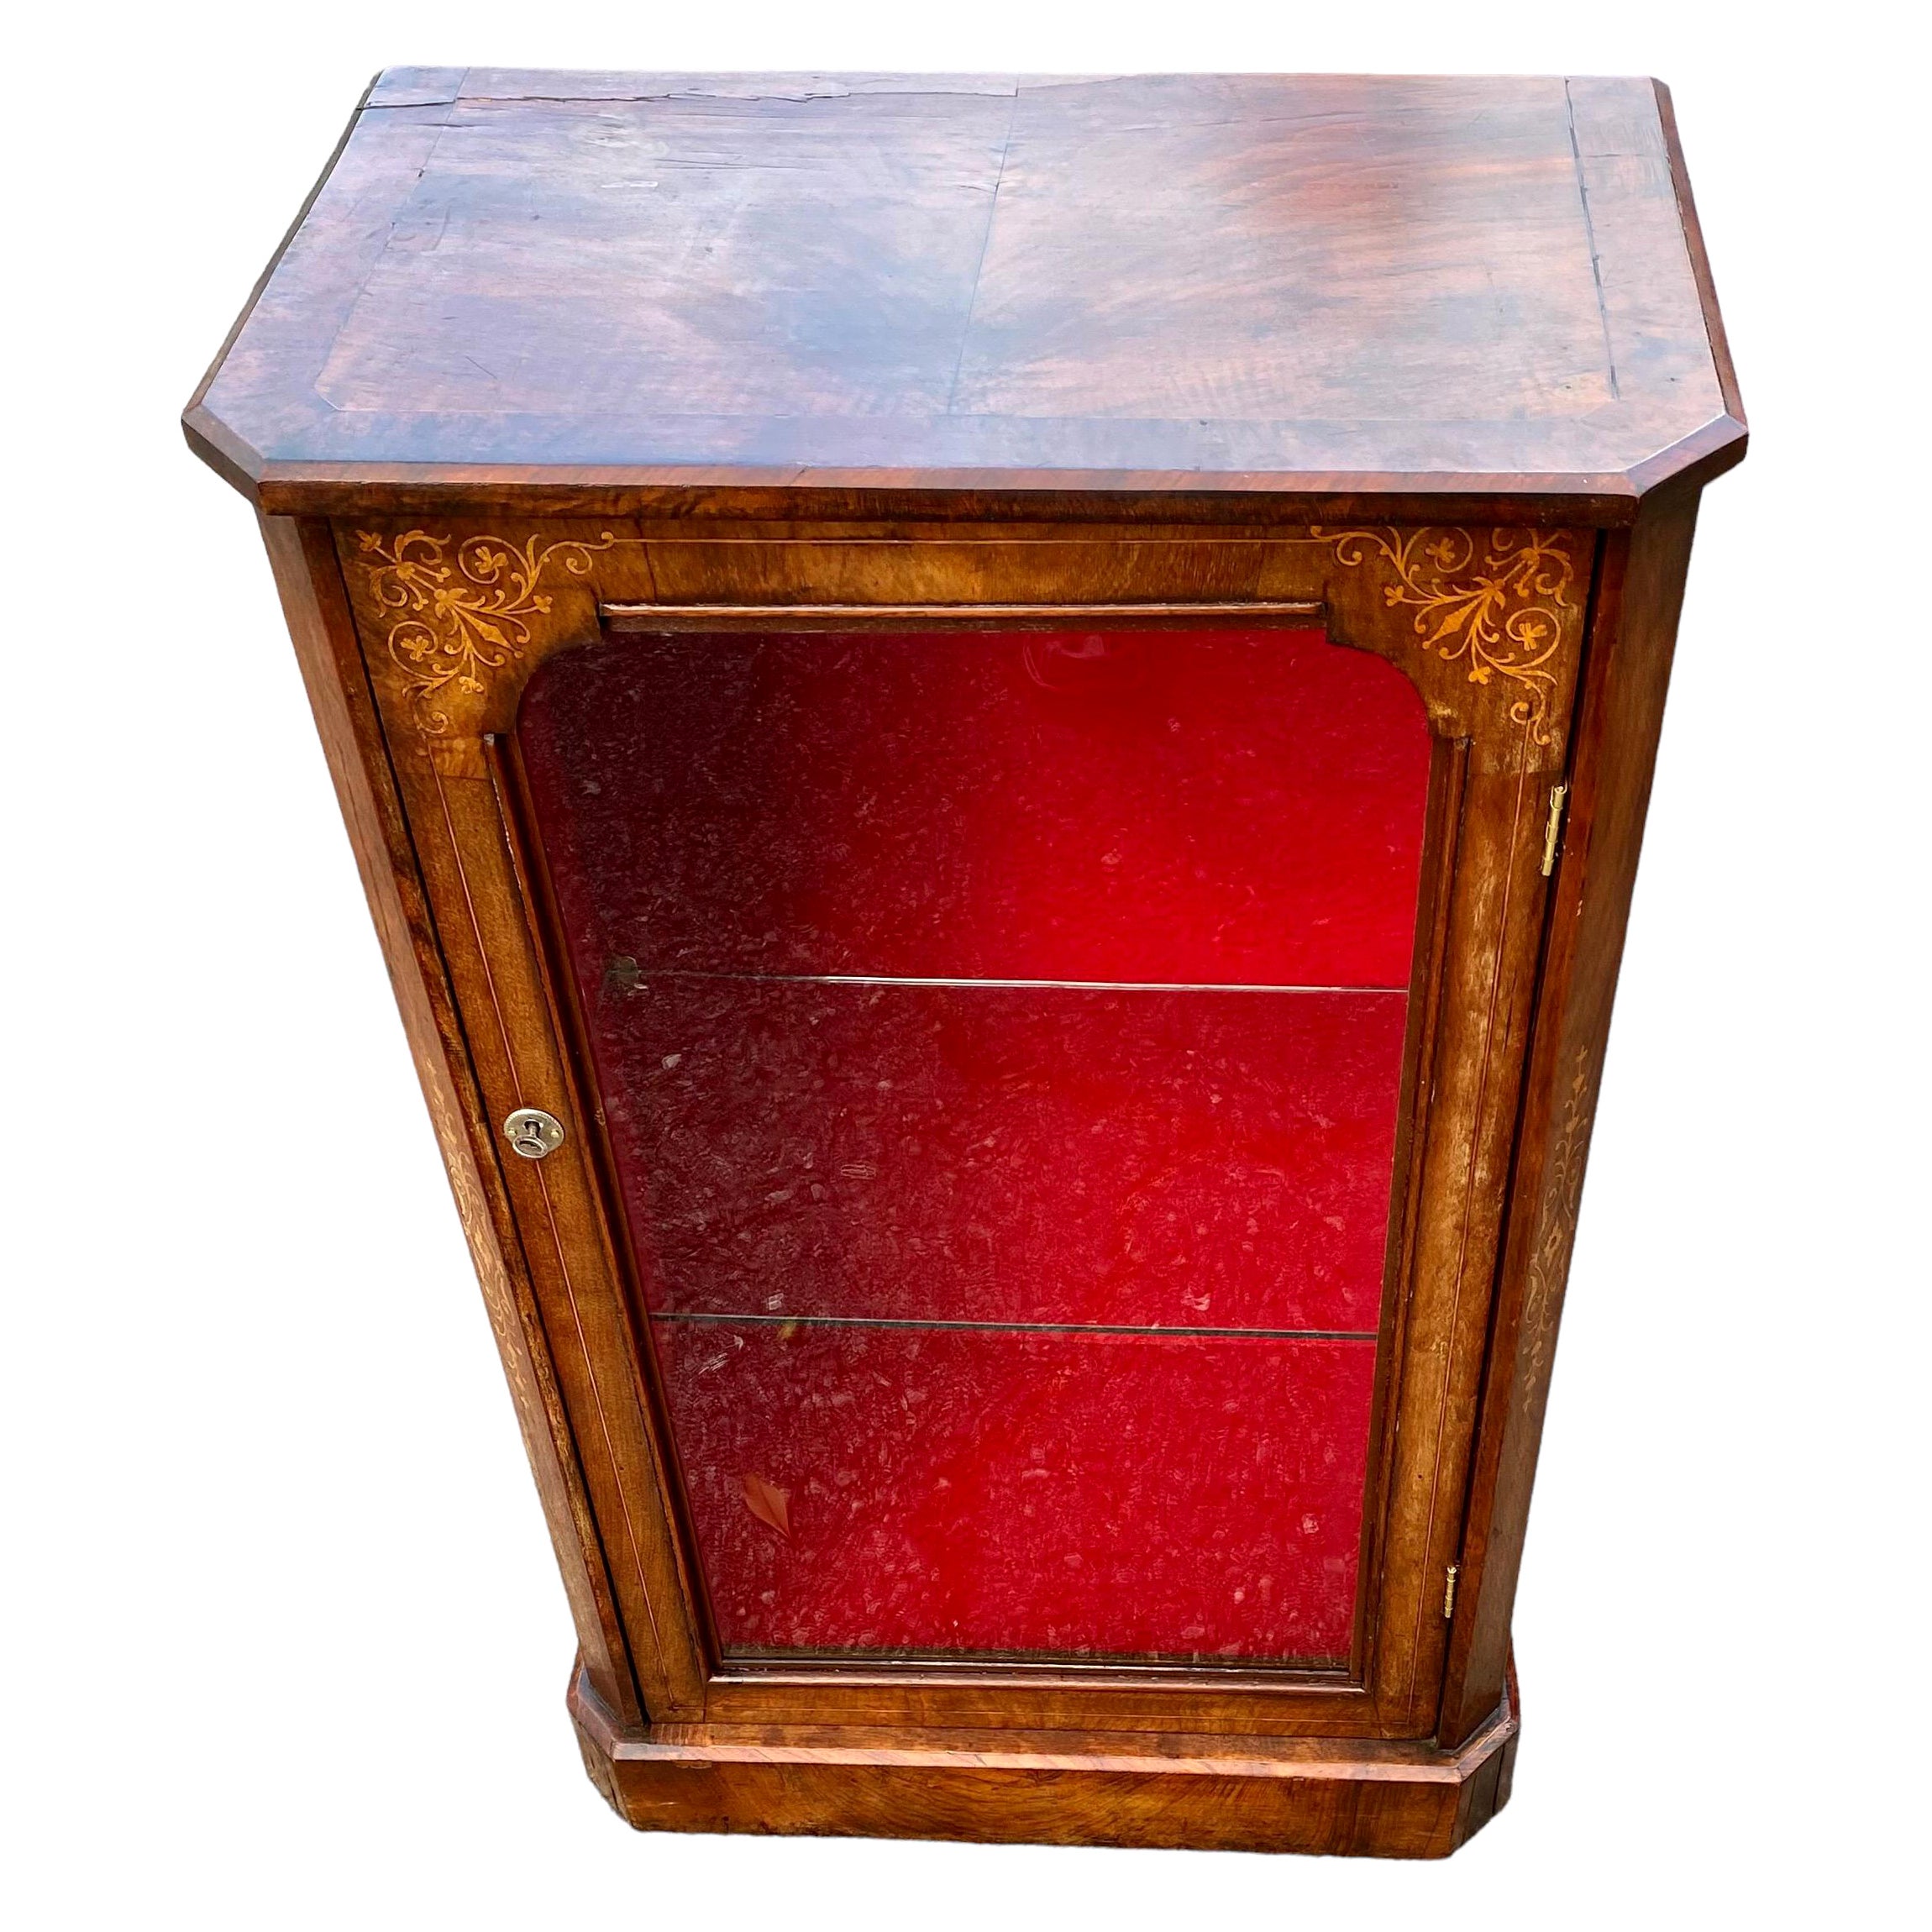 Early 20th Century Antique Edwardian Walnut and Marquetry Pier Cabinet For Sale